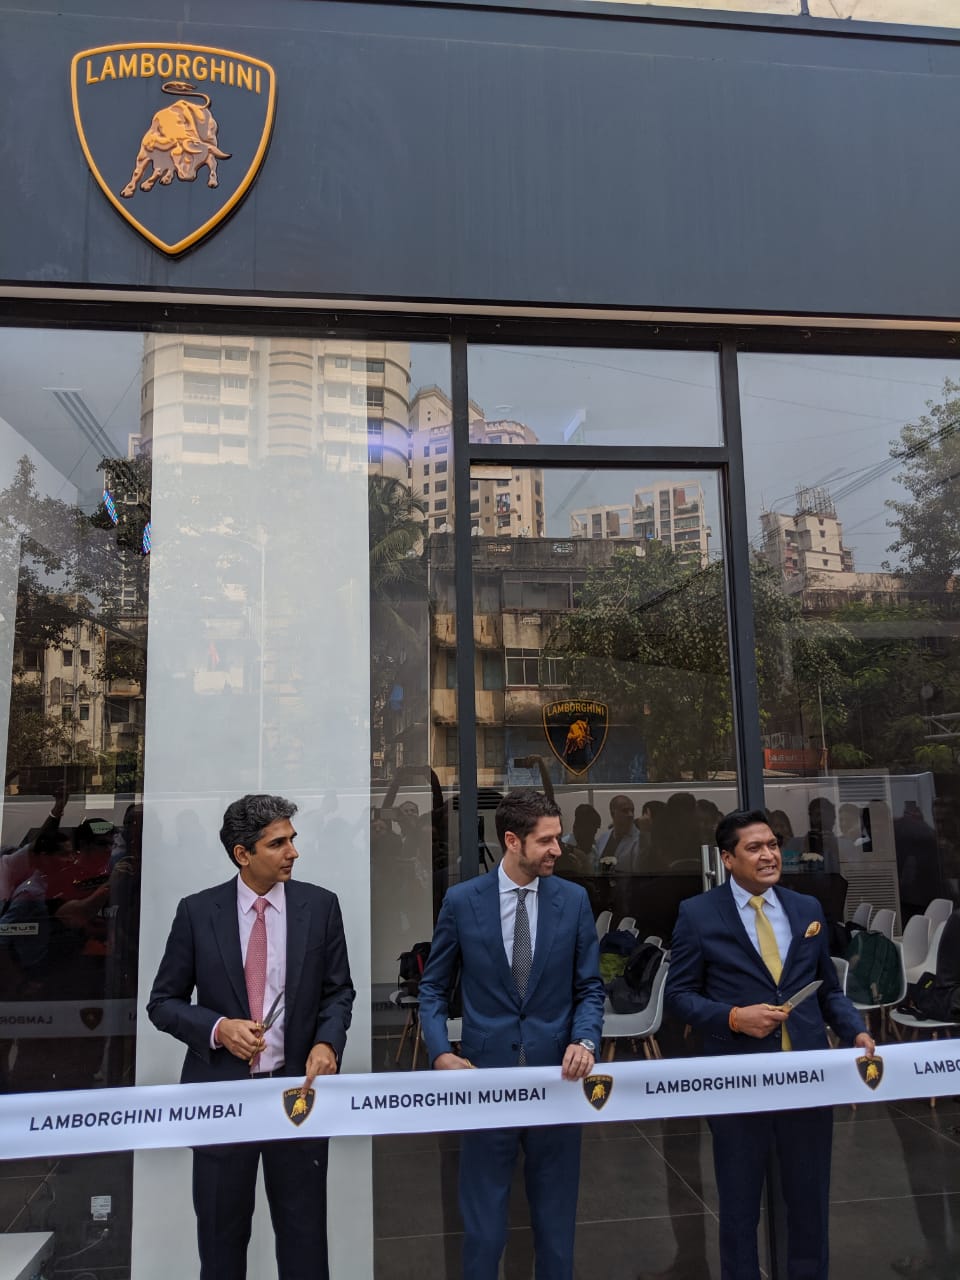 <p>Lamborghini India inaugurates a new showroom in Prabhadevi, with Sharad Agrawal, head LamborghiniIndia, and Matteo Ortenzi, CEO A-PAC operations in attendance. Also, coming up, the launch of the Huracan EVO Spyder!</p>